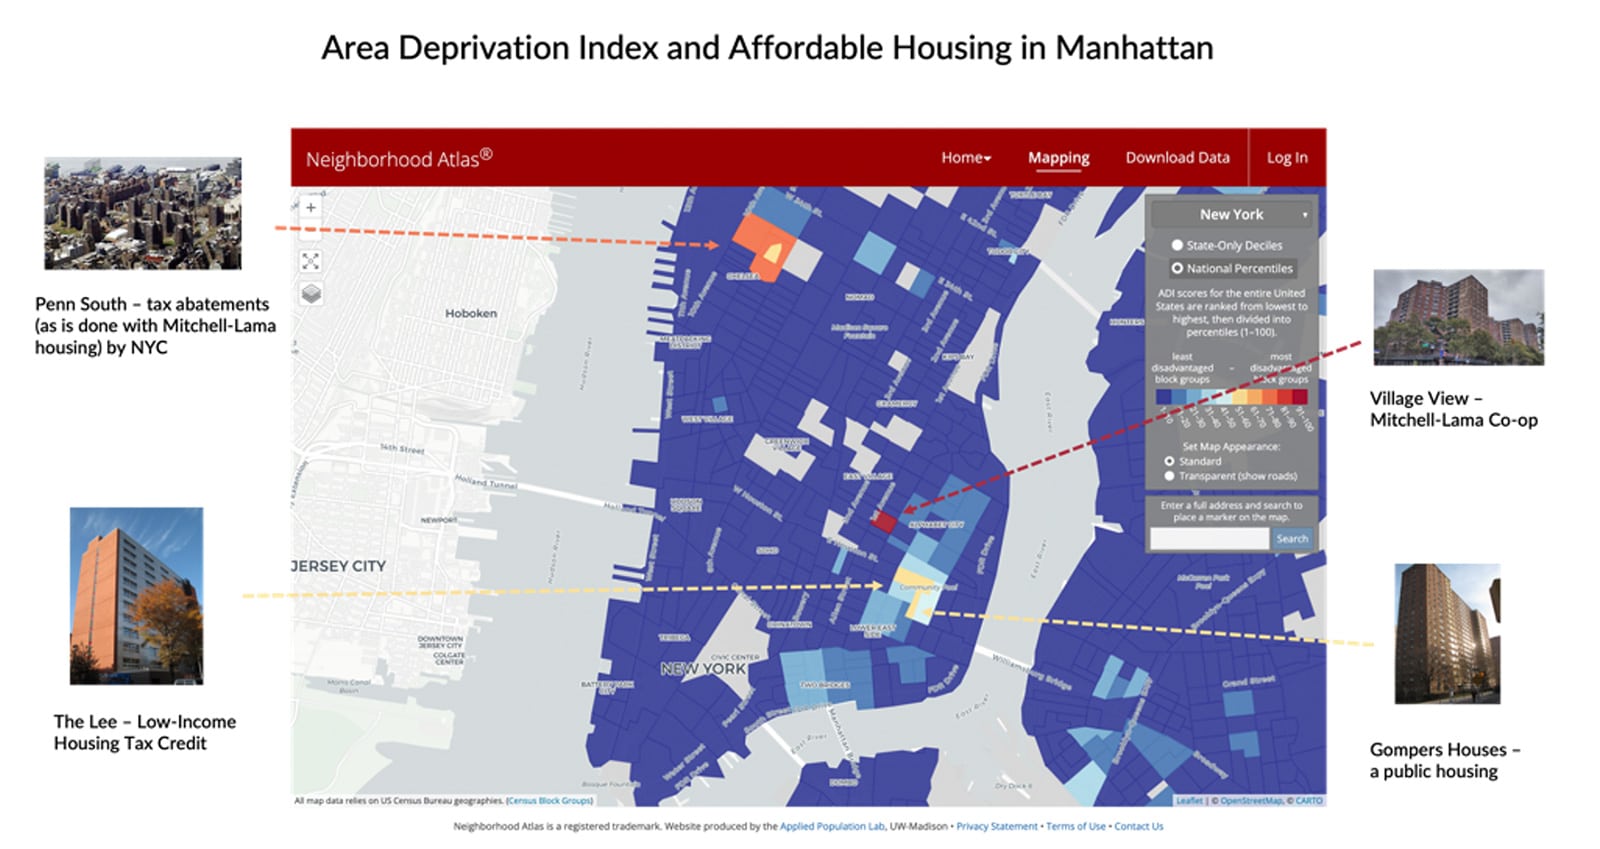 ADI and Affordable Housing in Manhattan